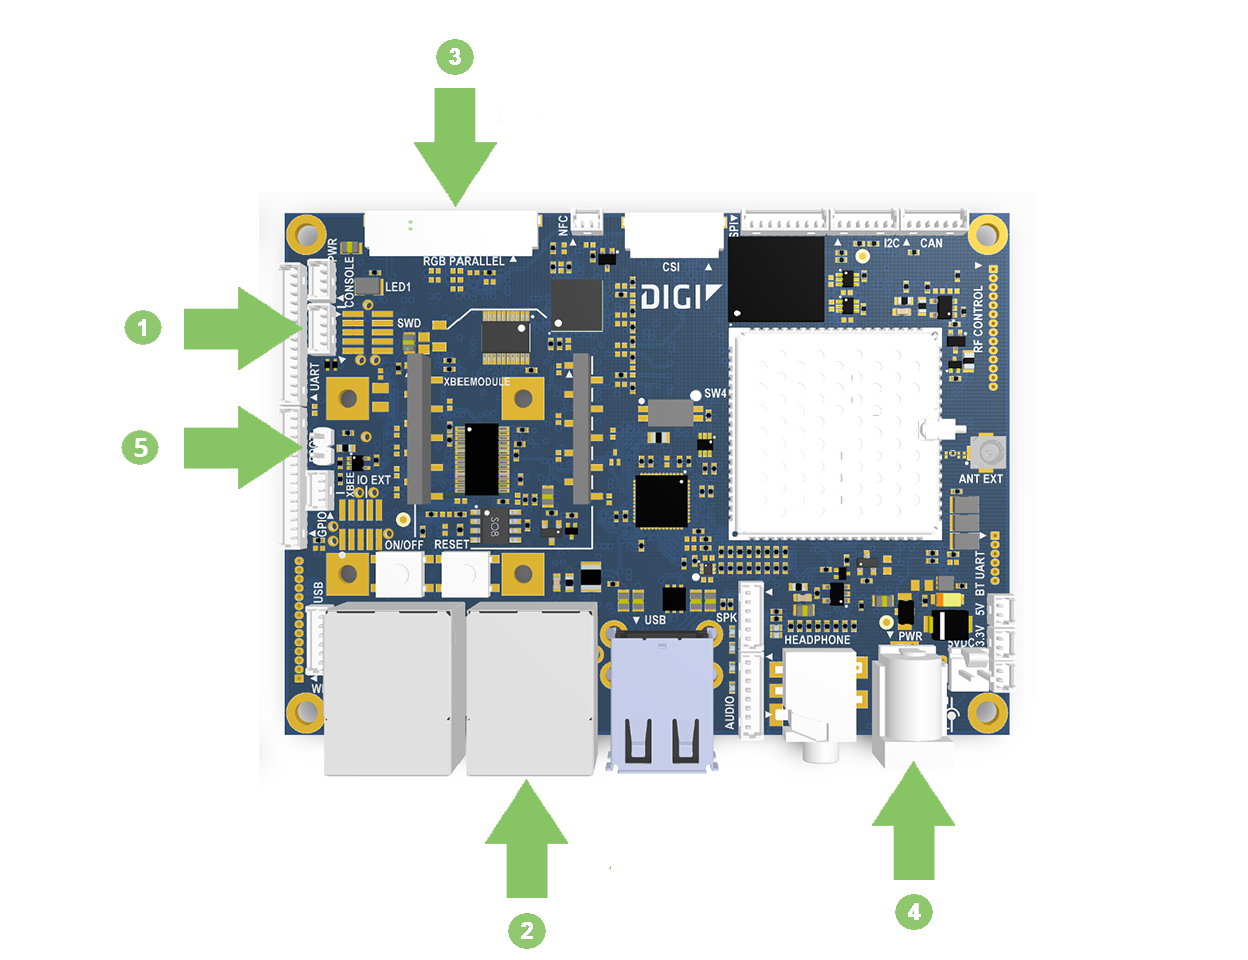 ConnectCore 6UL SBC Pro connections